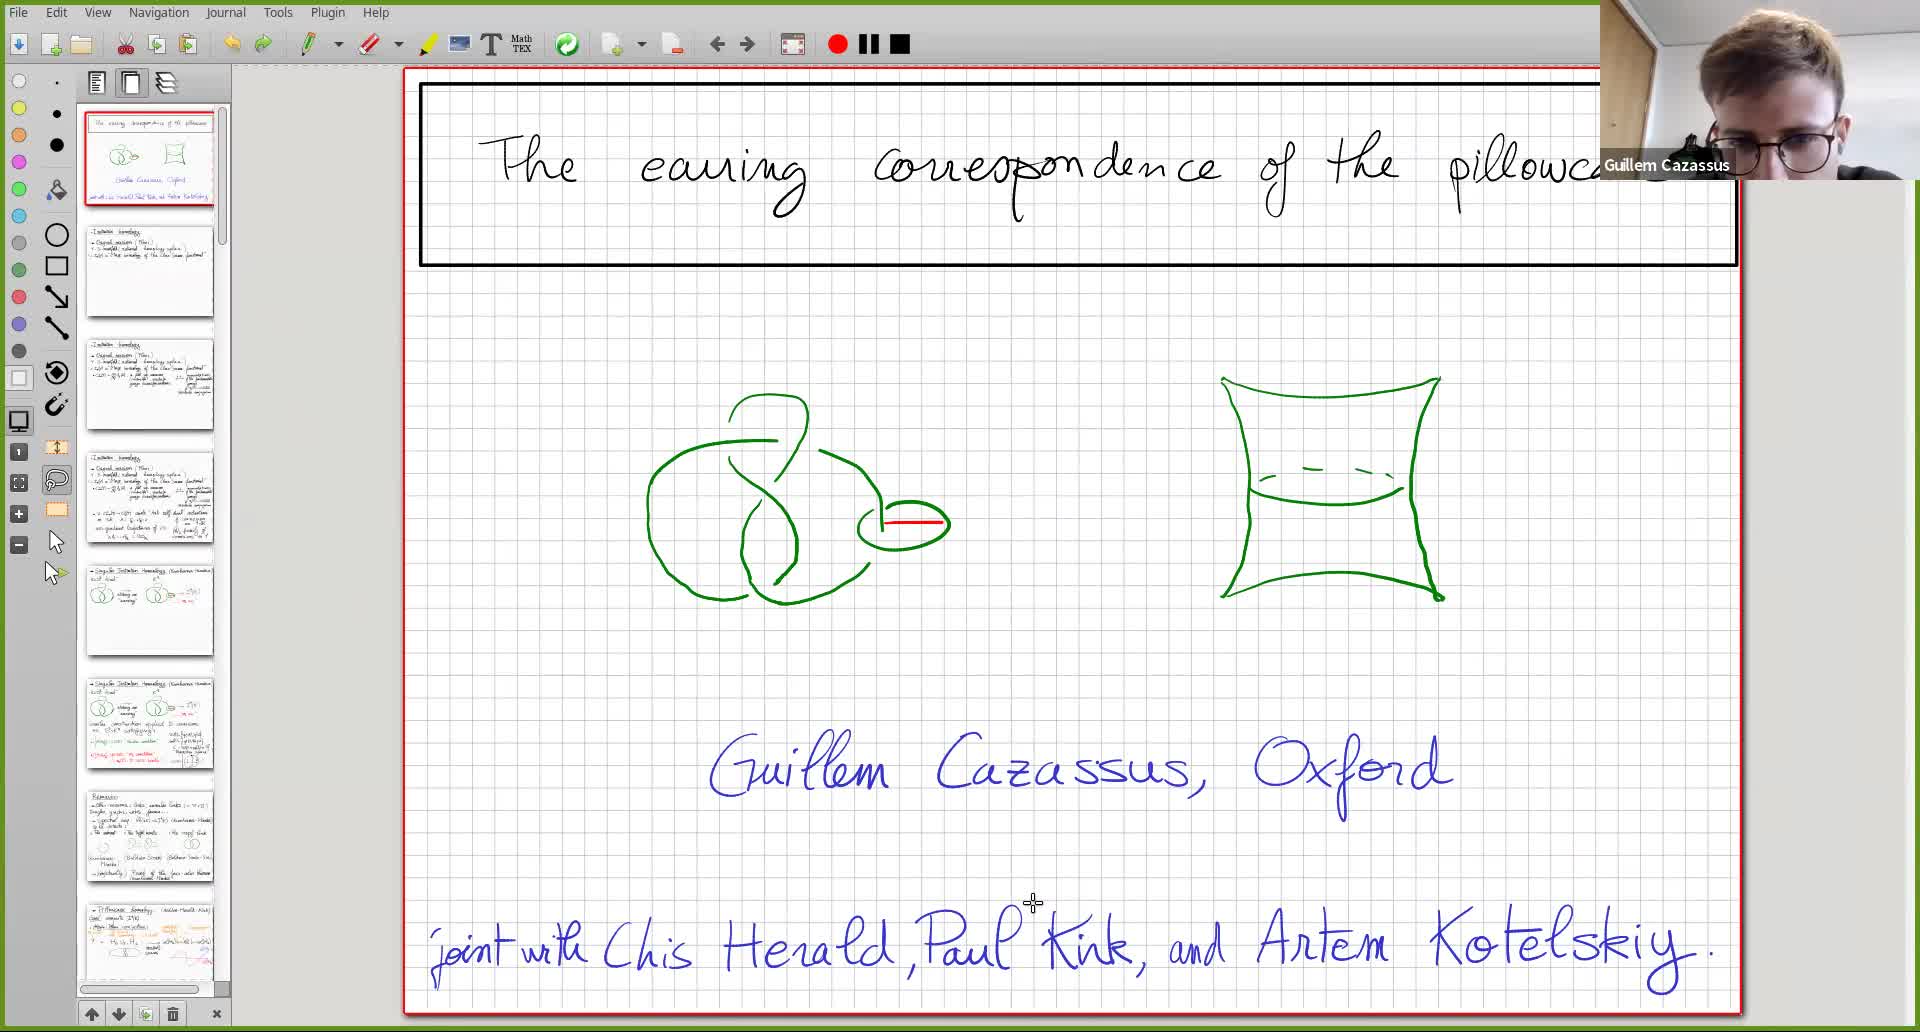 Guillem Cazassus: The earring correspondence of the pillowcase